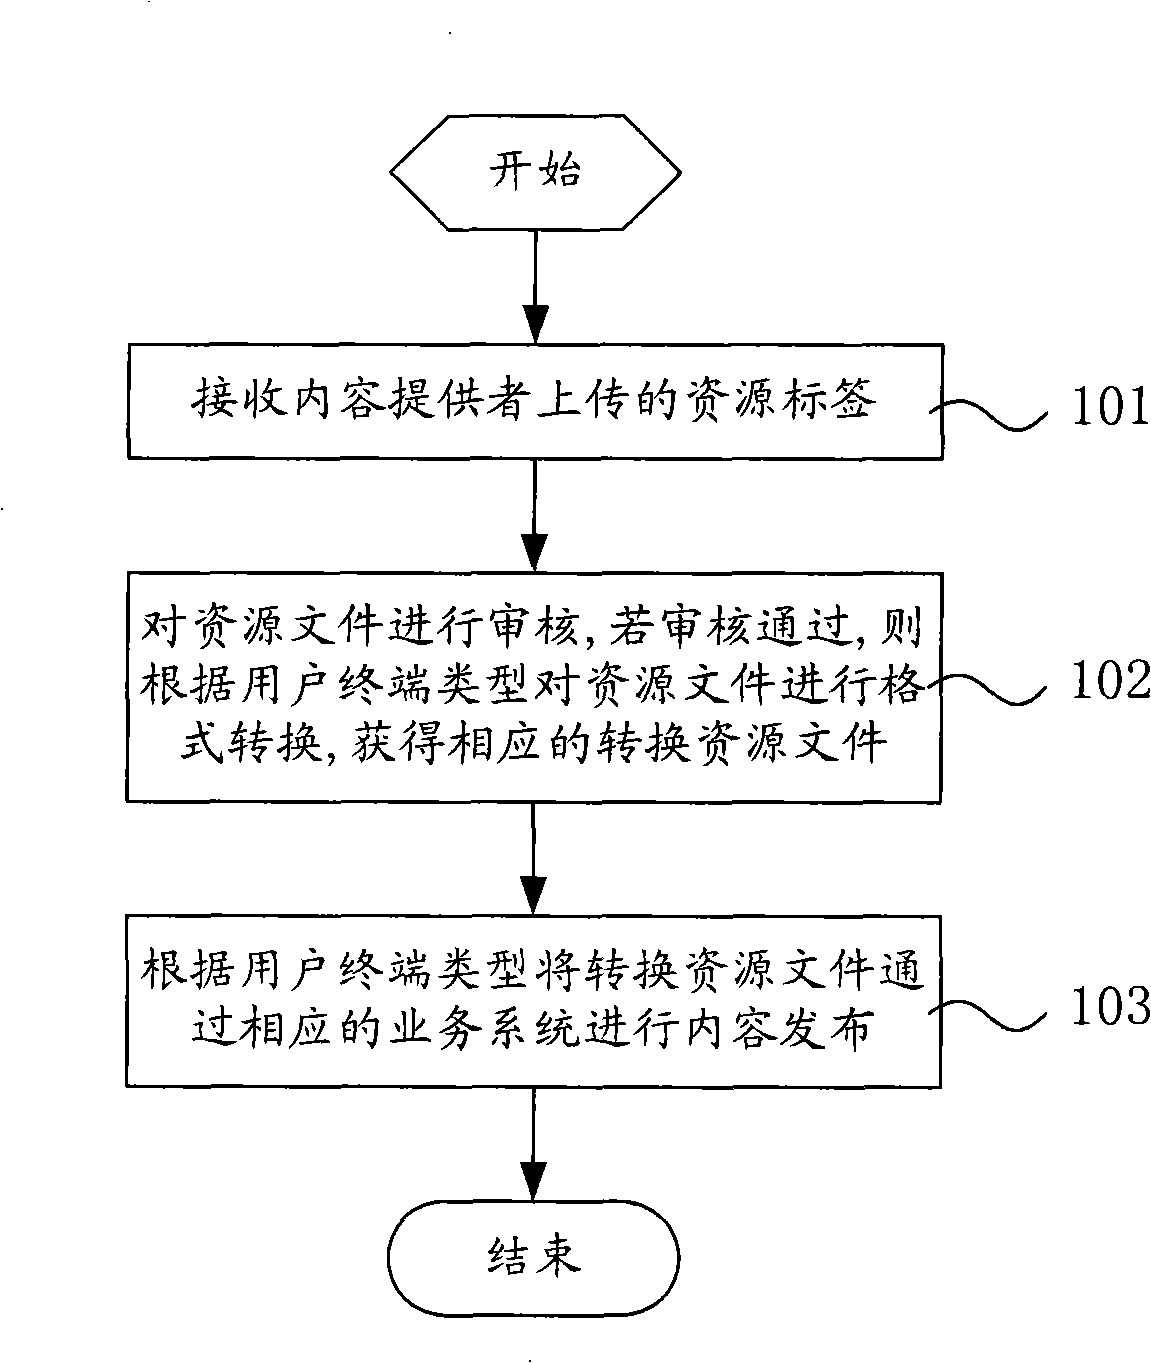 Method and system for unified network resource management